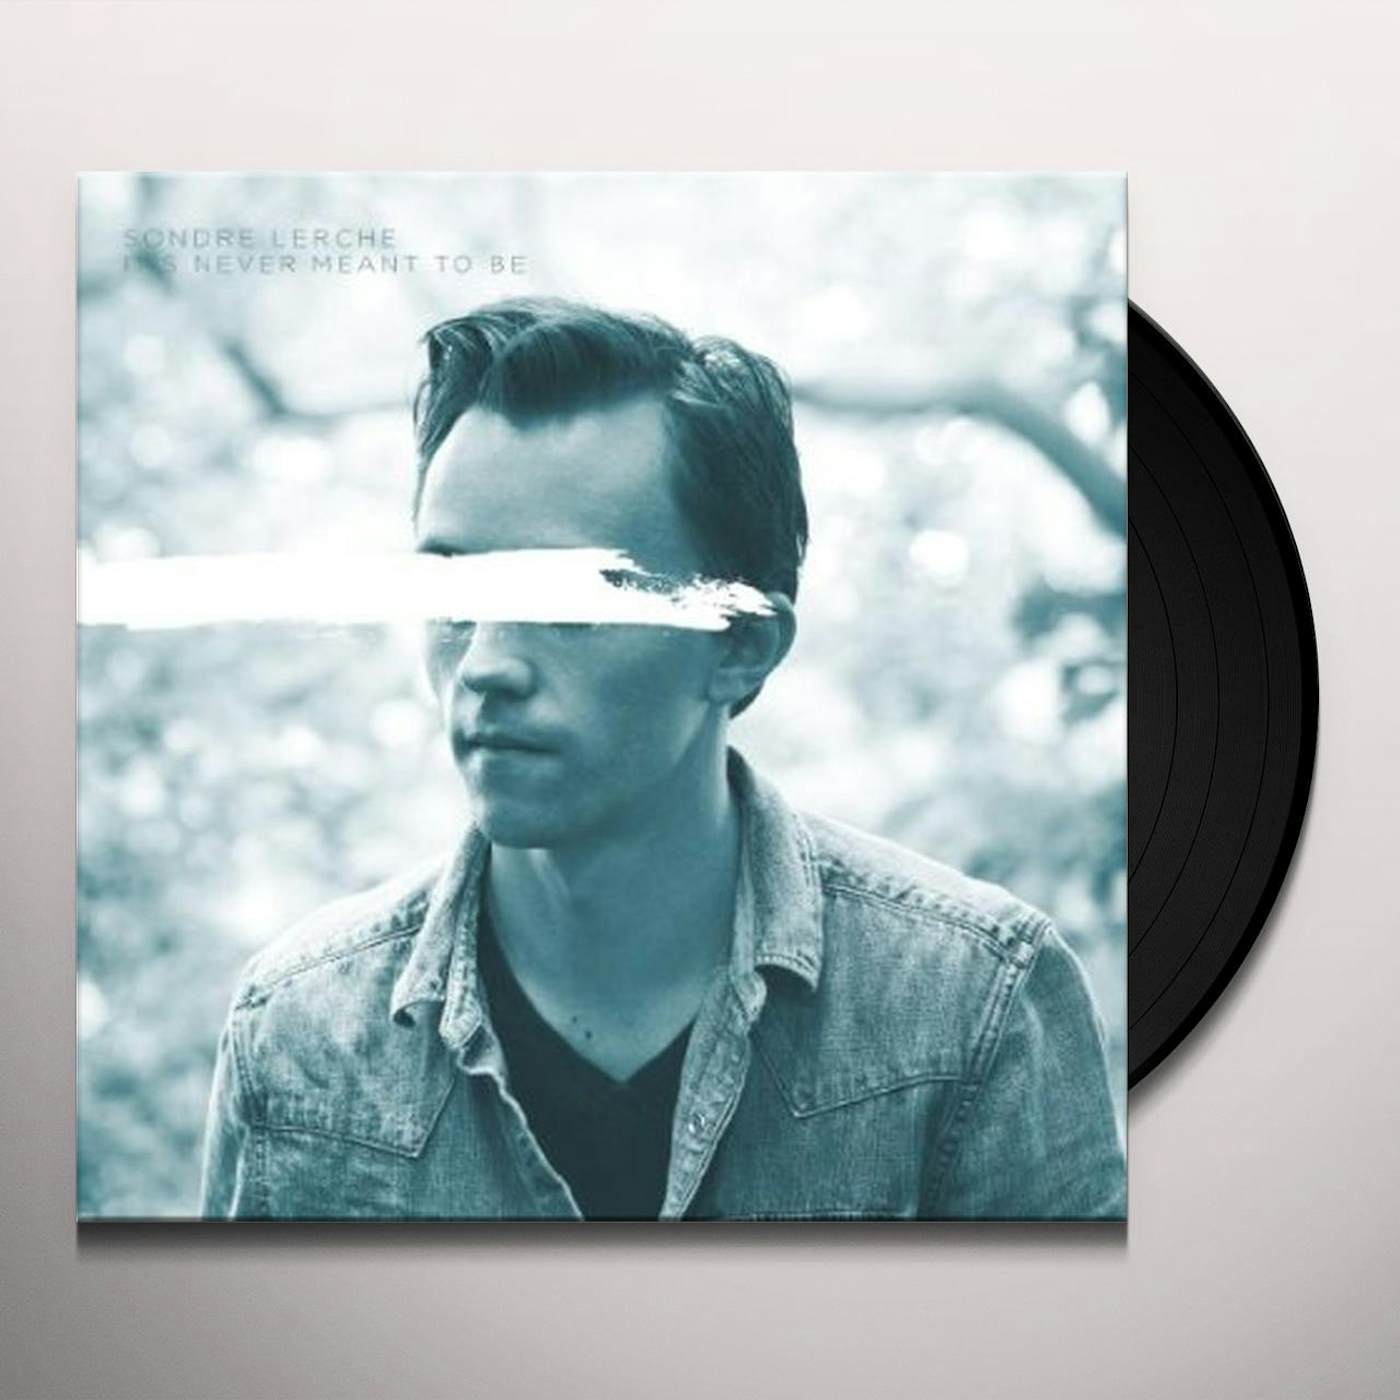 Sondre Lerche IT'S NEVER MEANT TO BE BW COUNTDOWN Vinyl Record